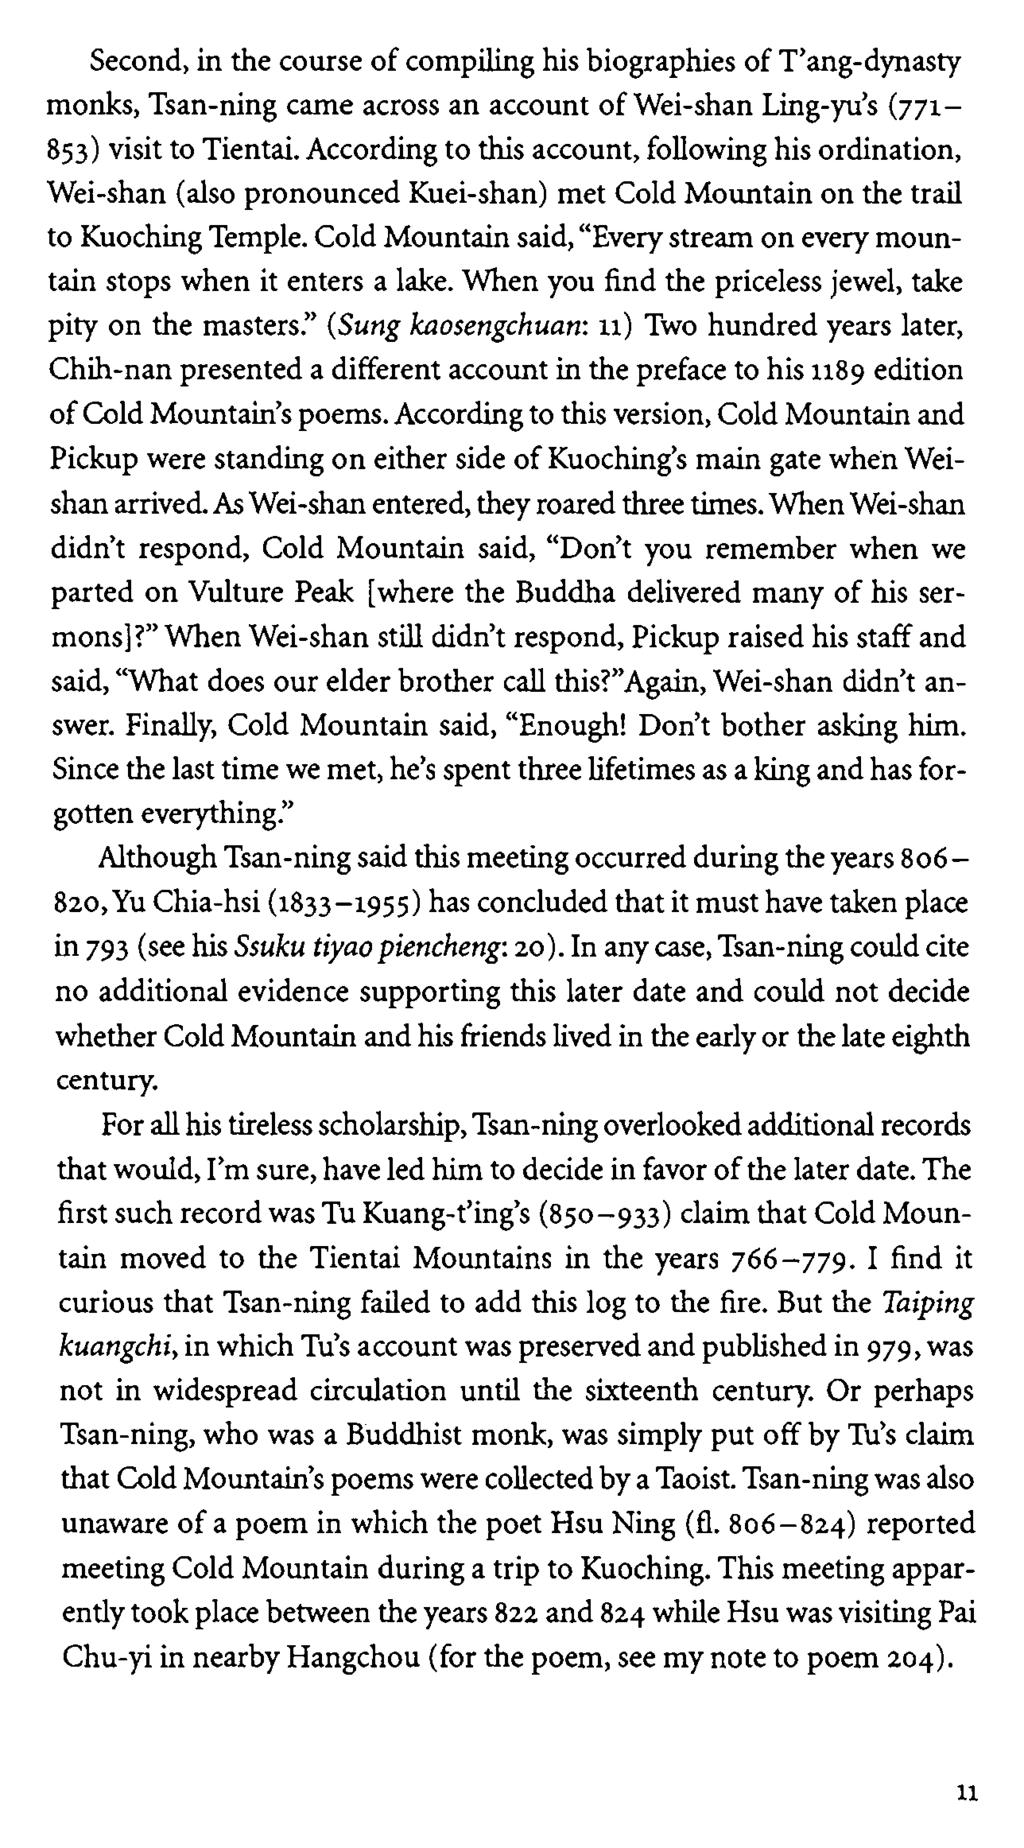 Second, in the course of compiling his biographies oft' ang-dynasty monks, Tsan-ning came across an account of Wei-shan Ling-yu's (771-853) visit to Tientai.